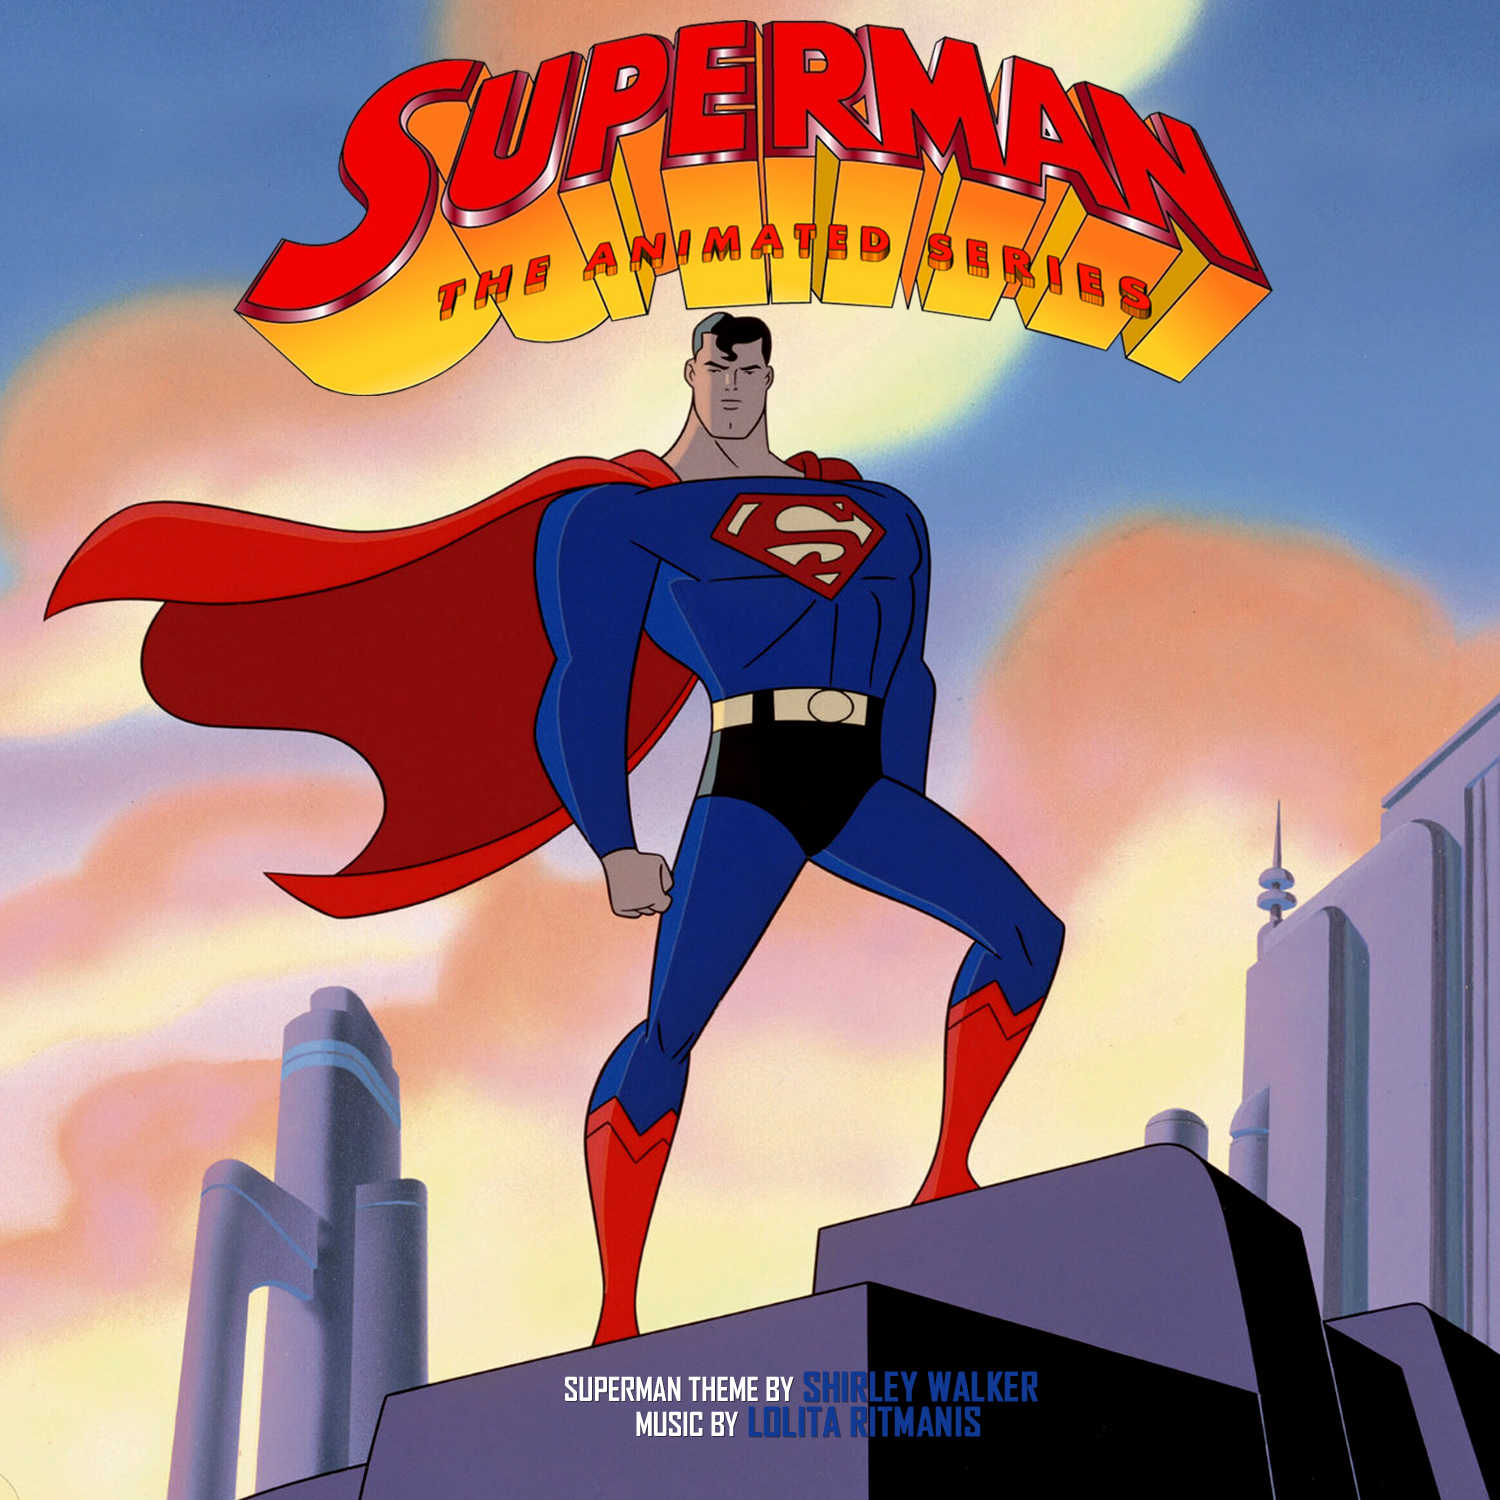 Nice Images Collection: Superman: The Animated Series Desktop Wallpapers